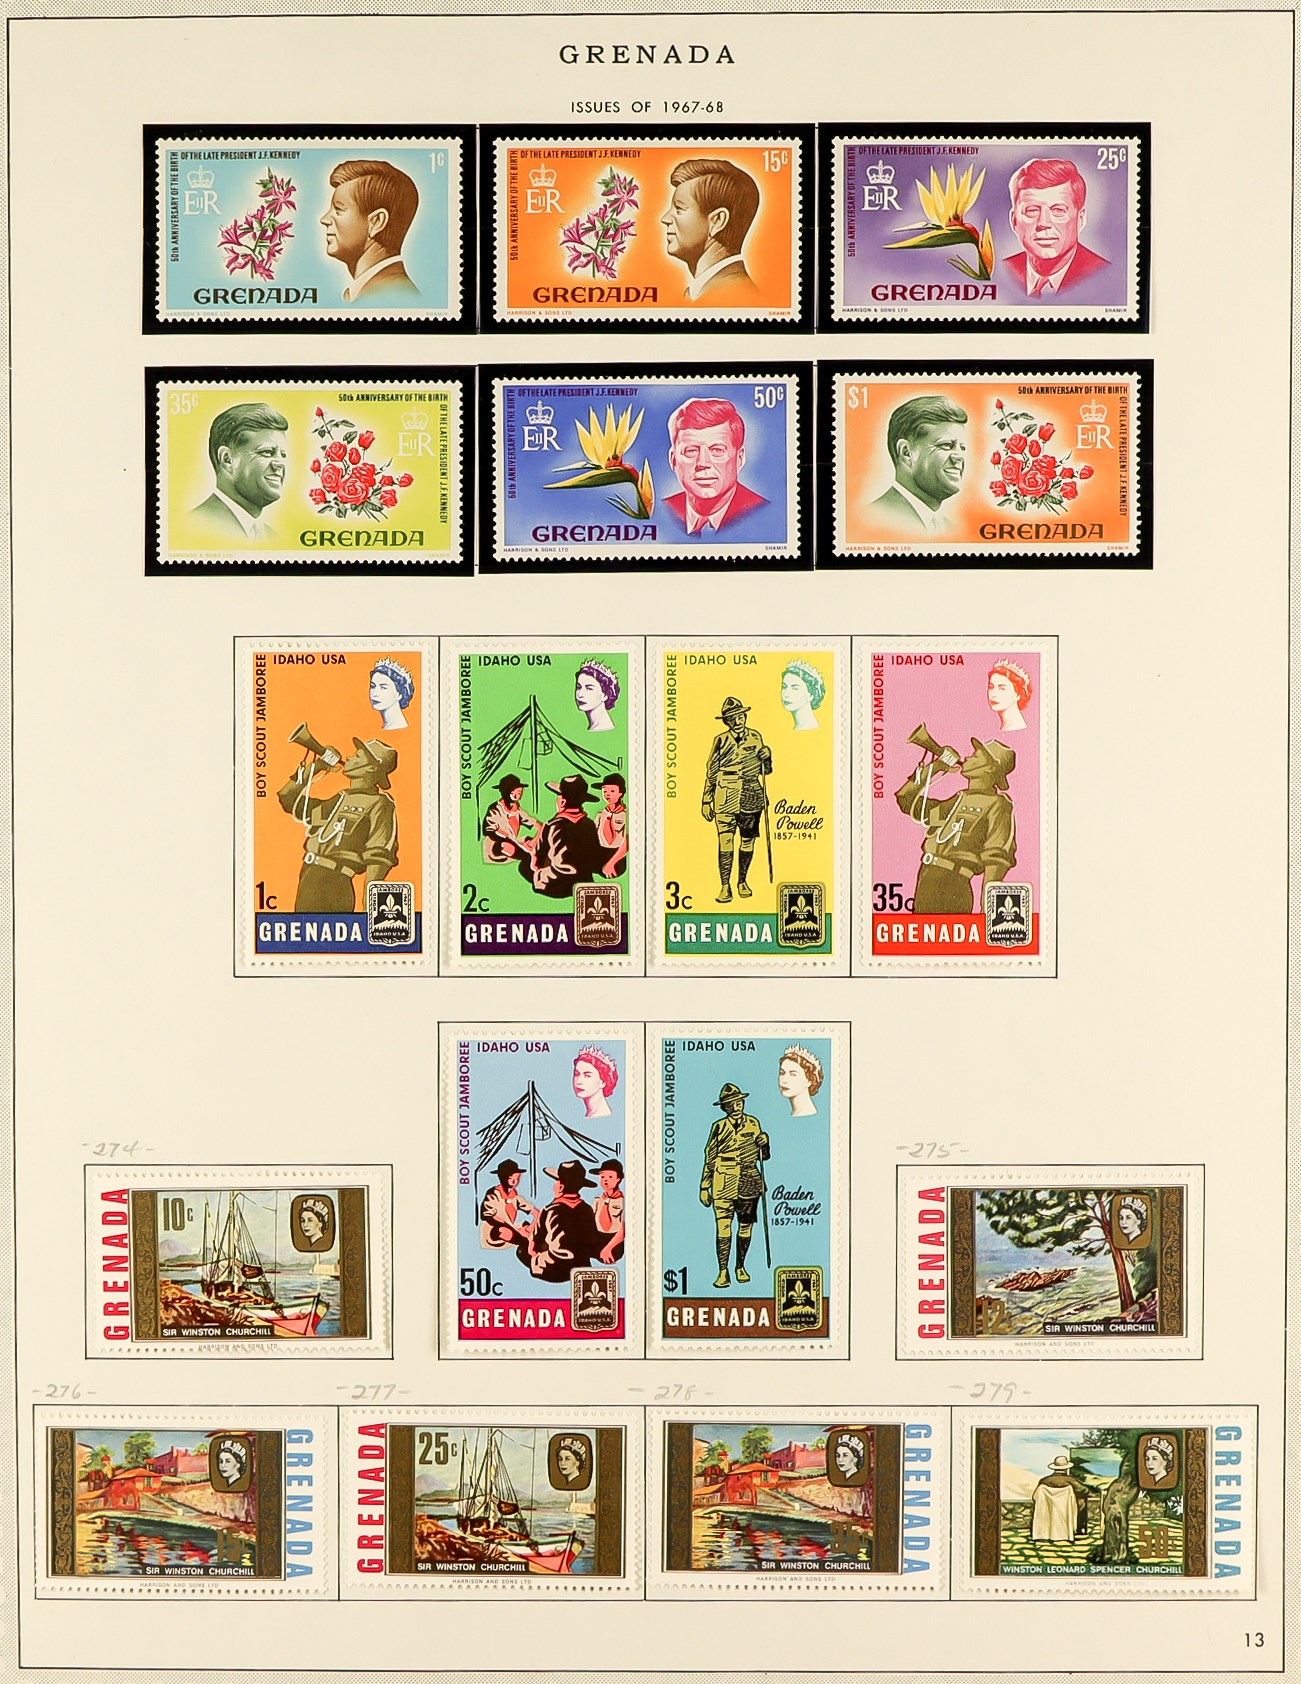 GRENADA 1953 - 1983 COLLECTION in album of chiefly never hinged mint sets & miniature sheets, some